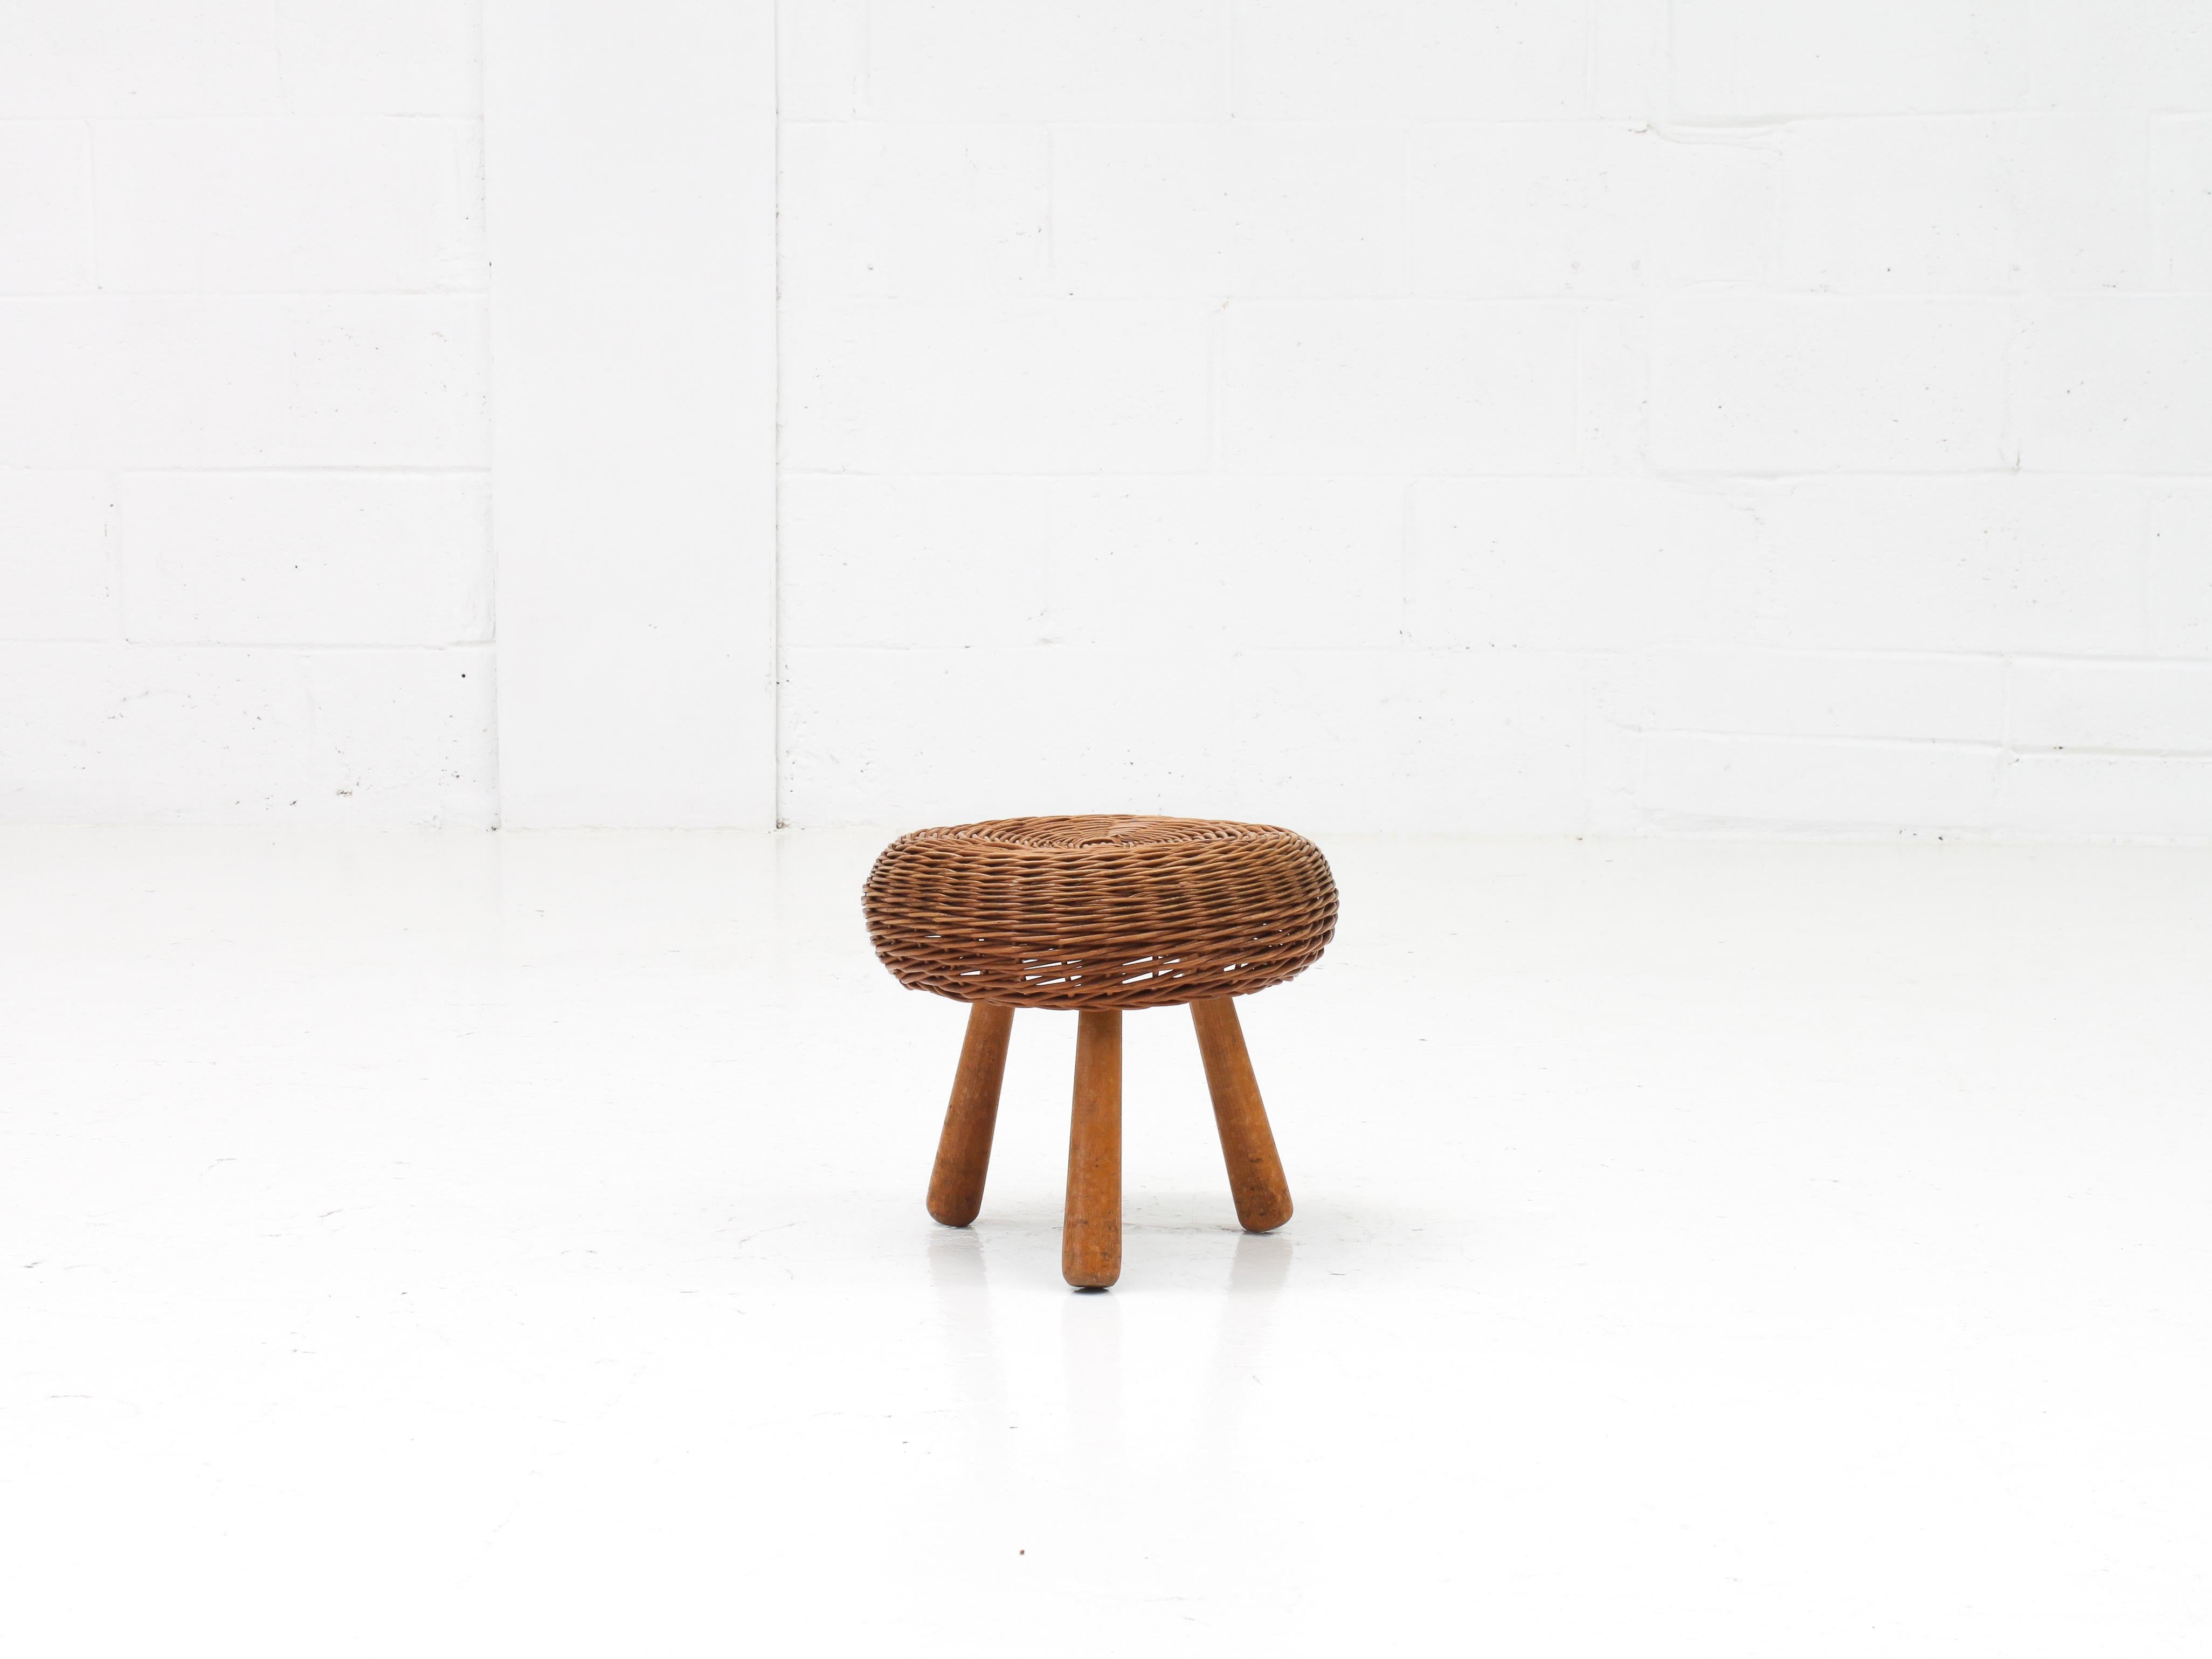 A Tony Paul attributed wicker stool dating from the 1960s.

The stool is constructed of a woven wicker top sitting on 3 tapered wooden legs. 

A great example, in totally original condition with wonderful splaying to the heavily tapered legs

Some